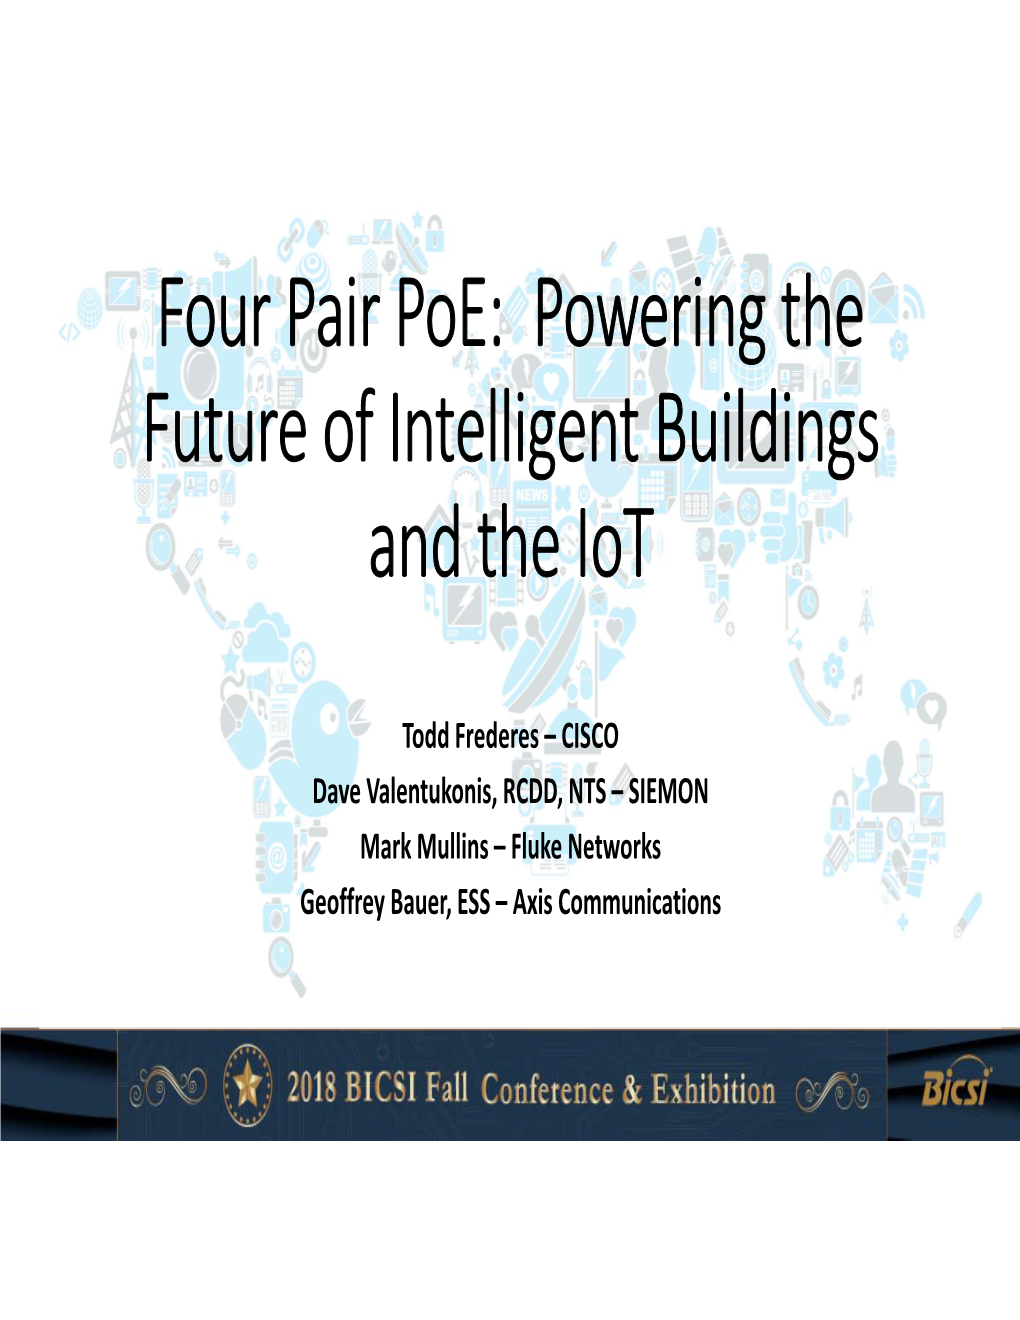 Four Pair Poe: Powering the Future of Intelligent Buildings and the Iot